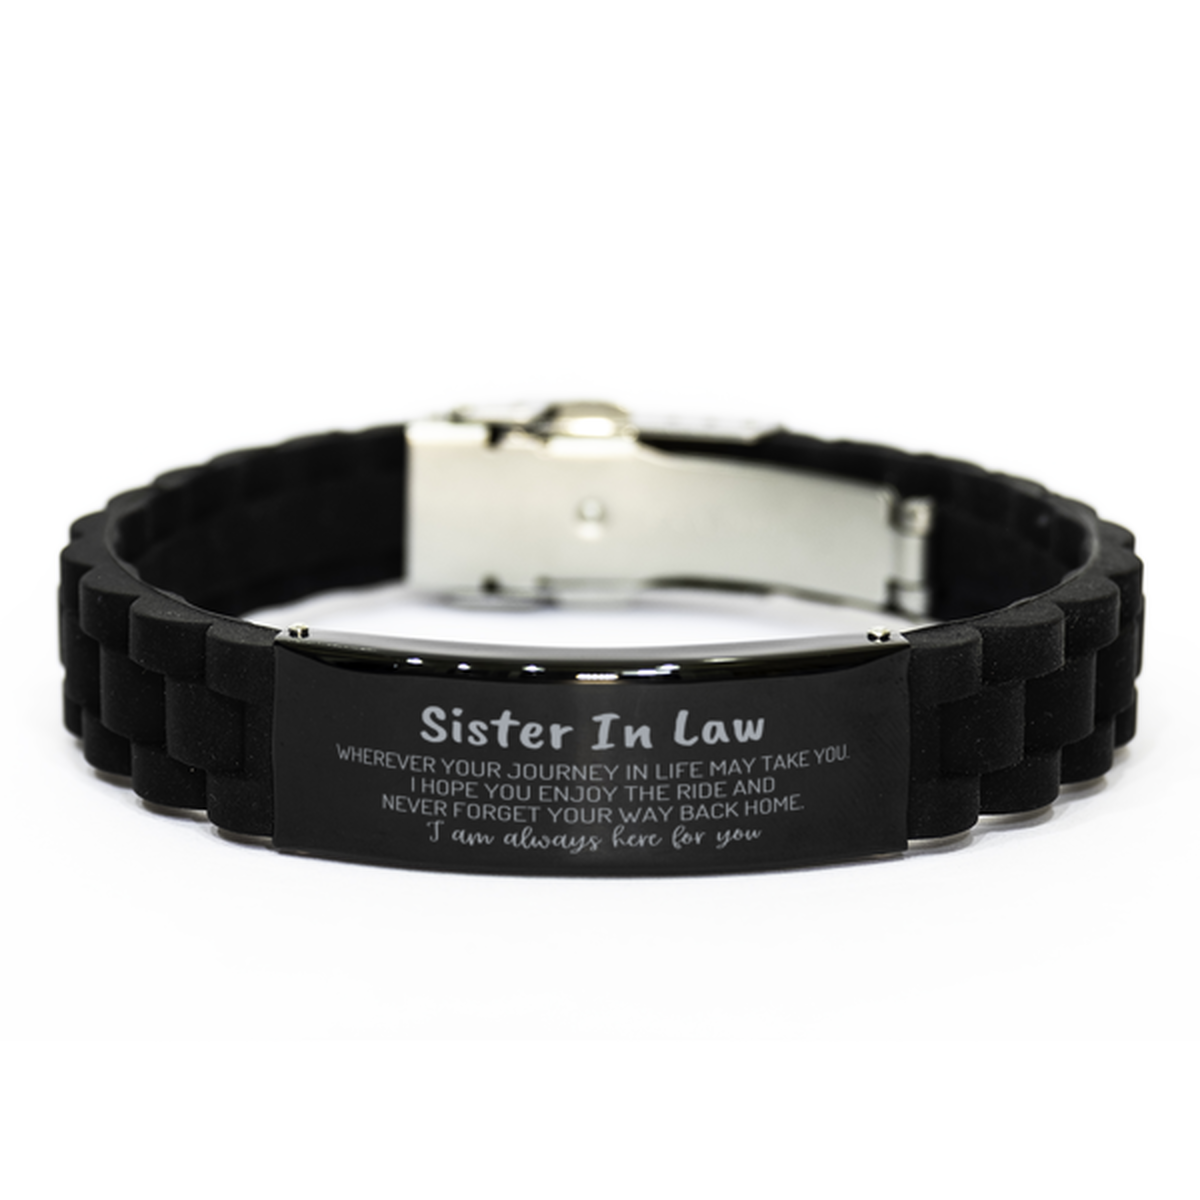 Sister In Law wherever your journey in life may take you, I am always here for you Sister In Law Black Glidelock Clasp Bracelet, Awesome Christmas Gifts For Sister In Law, Sister In Law Birthday Gifts for Men Women Family Loved One